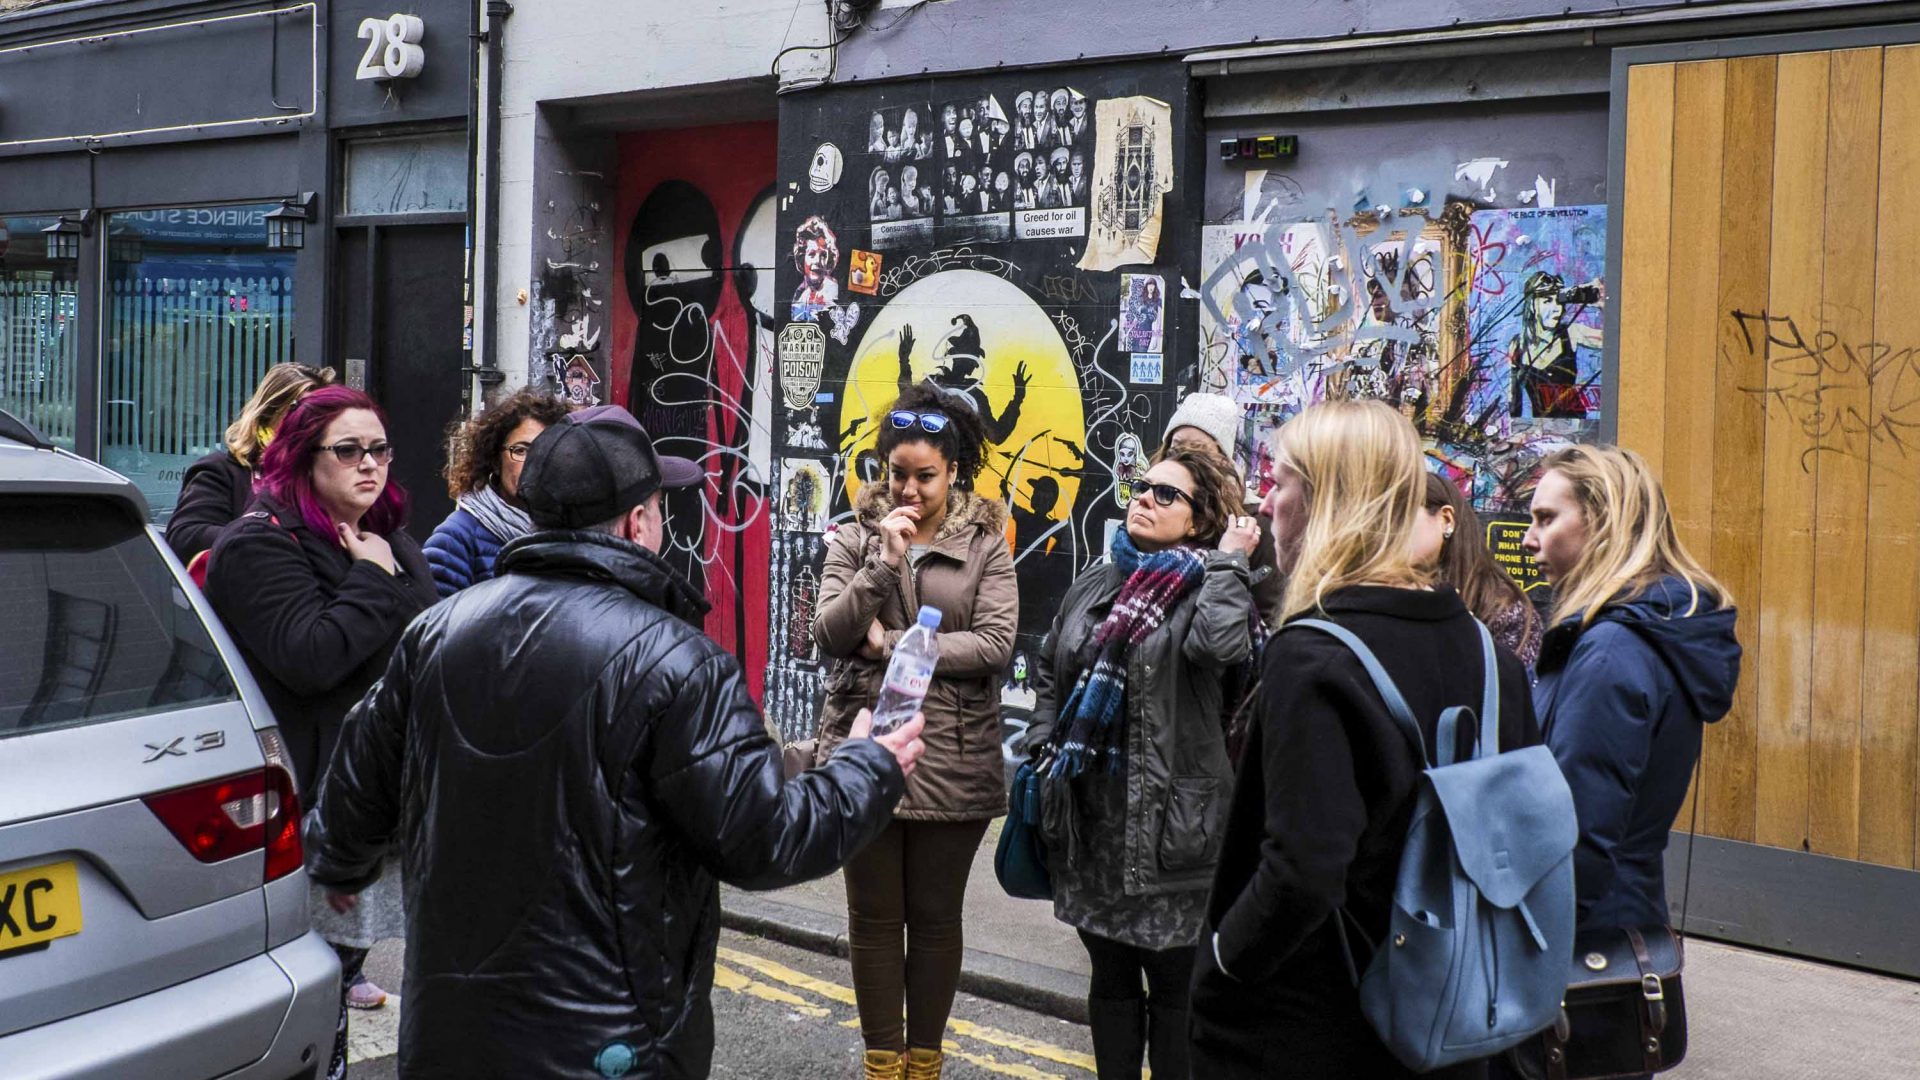 A man stands with a group of people from a tour in front of some street art.